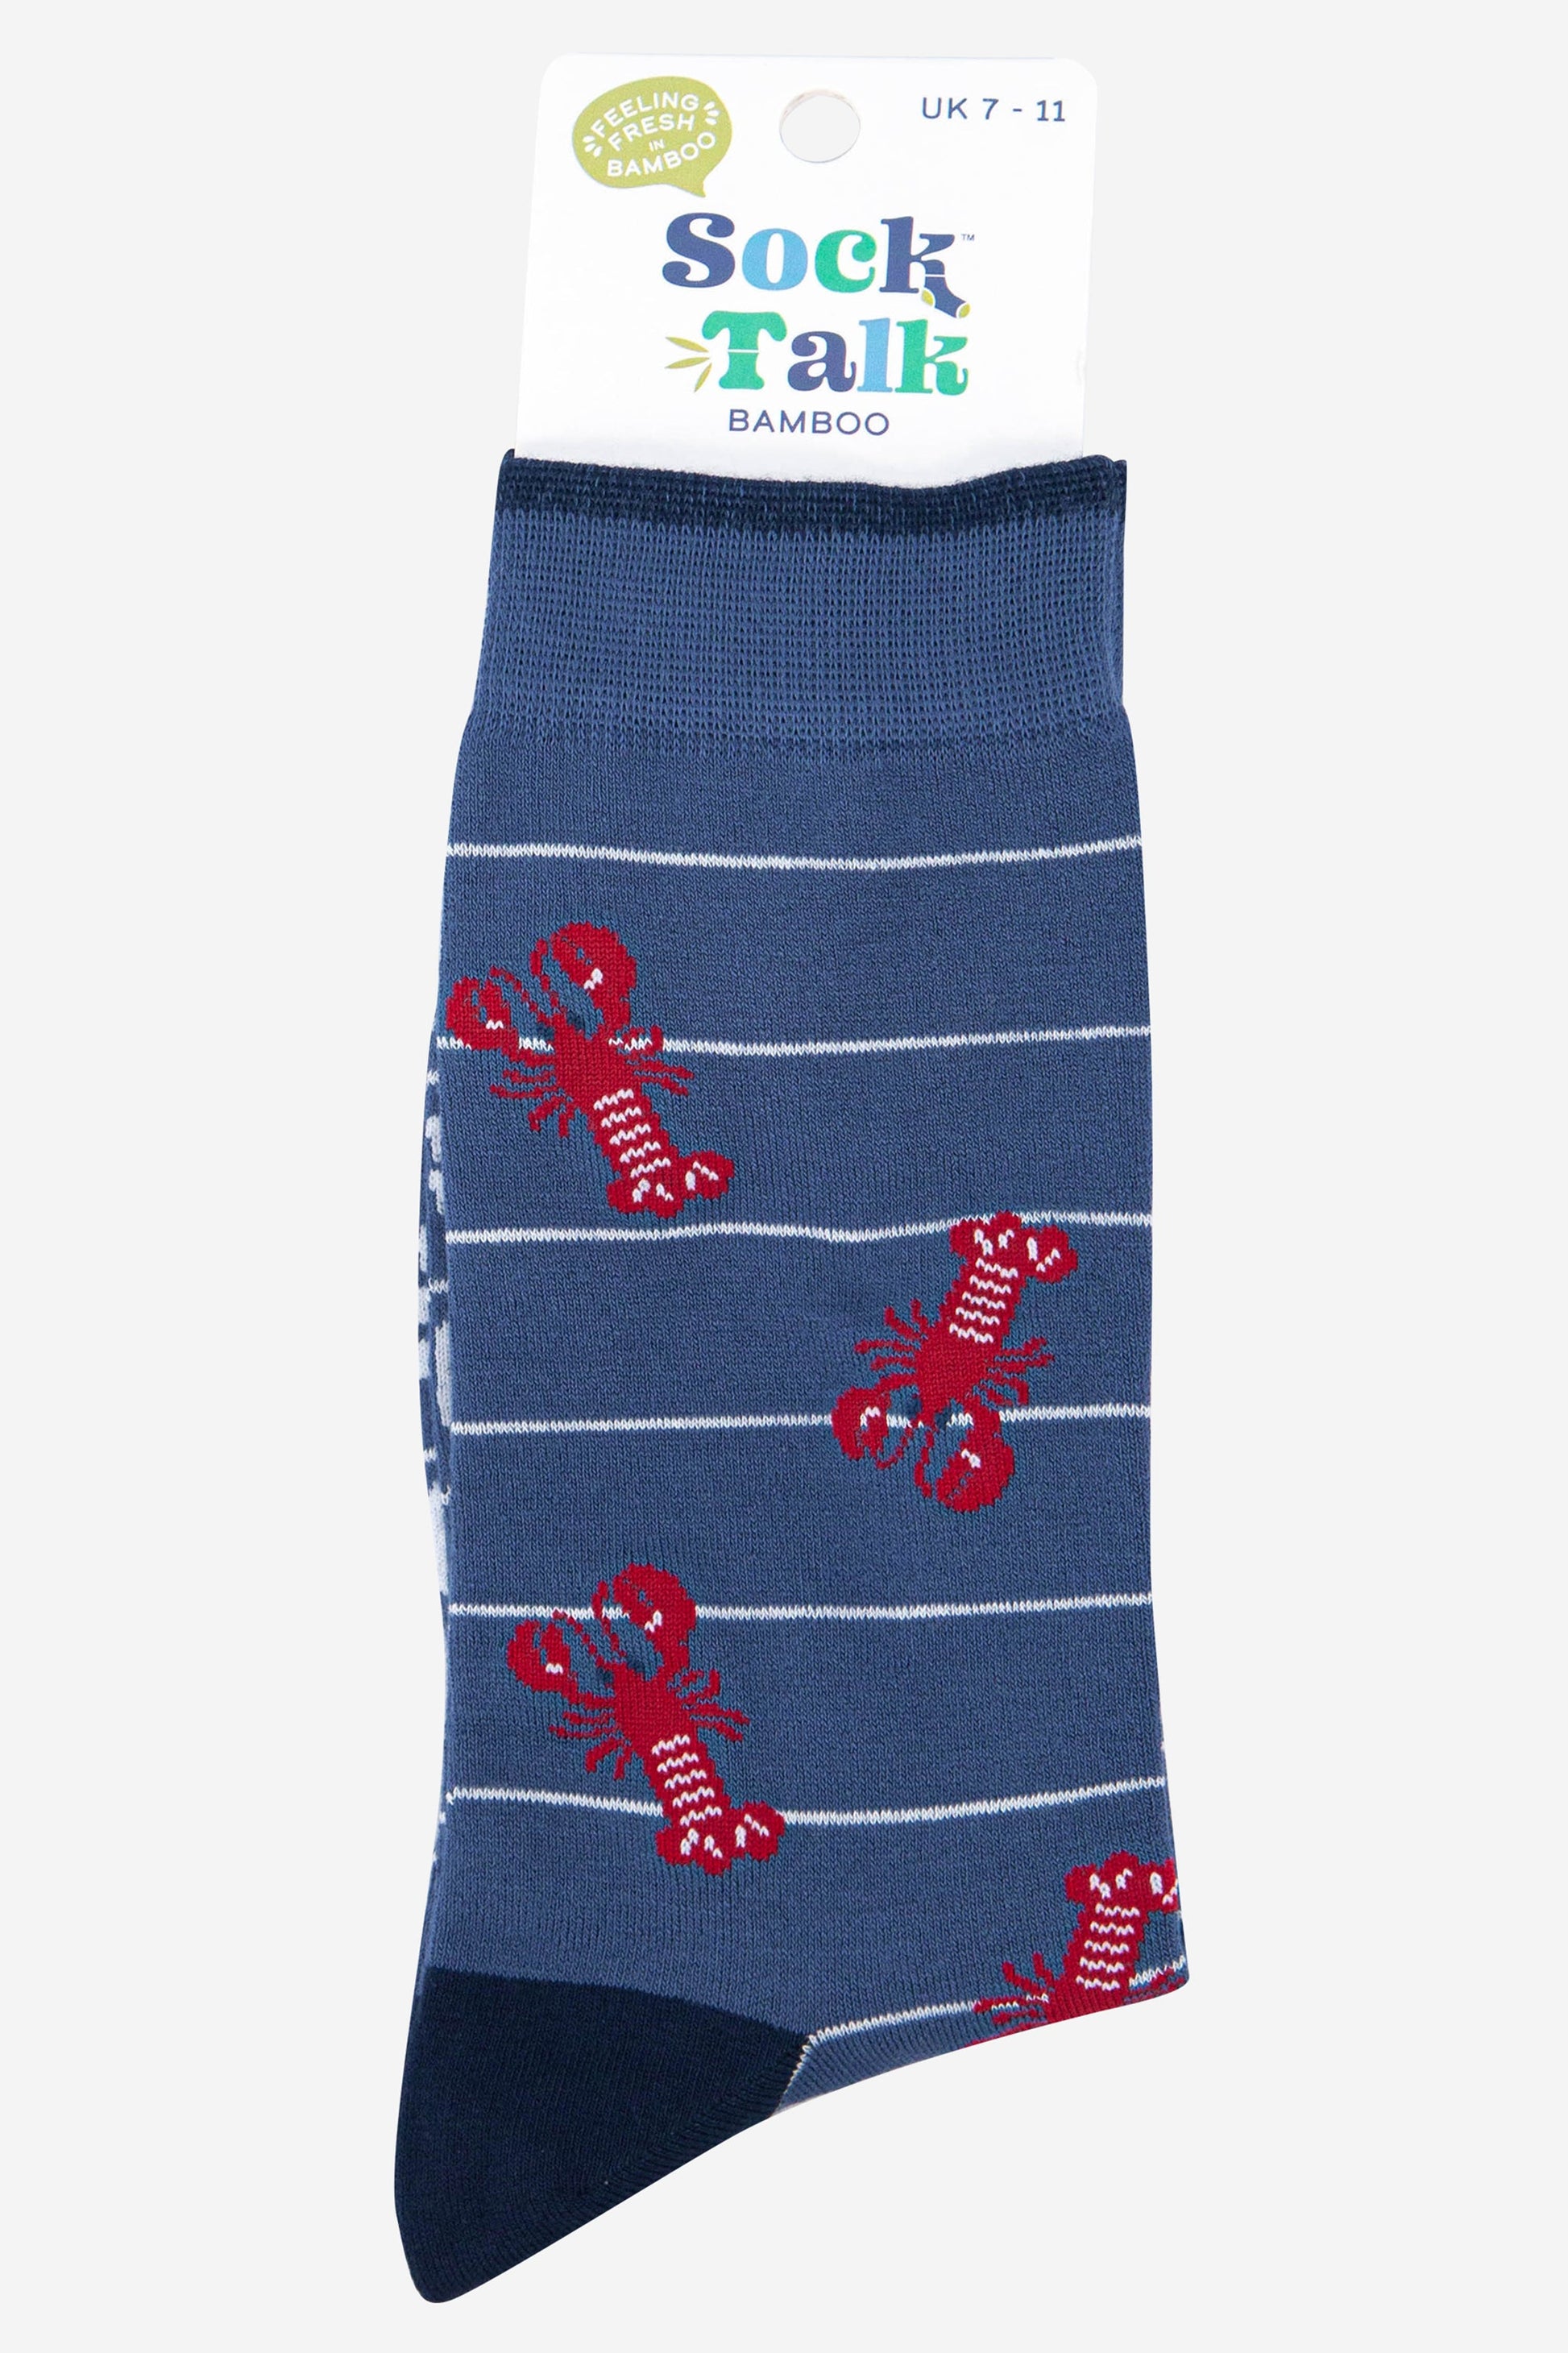 mens blue bamboo dress socks with a red lobster pattern uk size 7-11